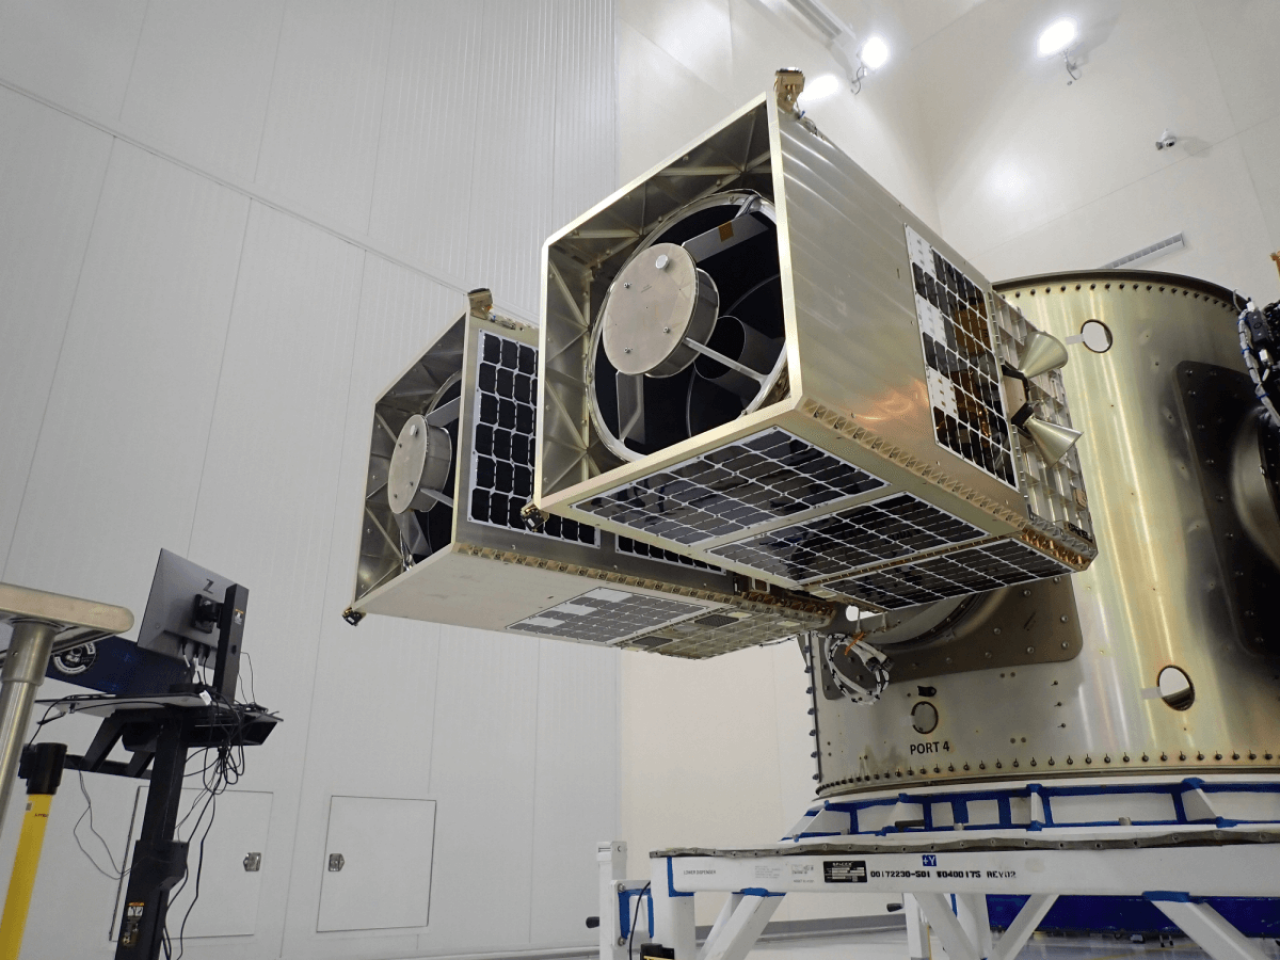 Two GHOSt satellites being equipped with Corning’s hyperspectral sensor technology at Corning’s Keene, New Hampshire, facility.